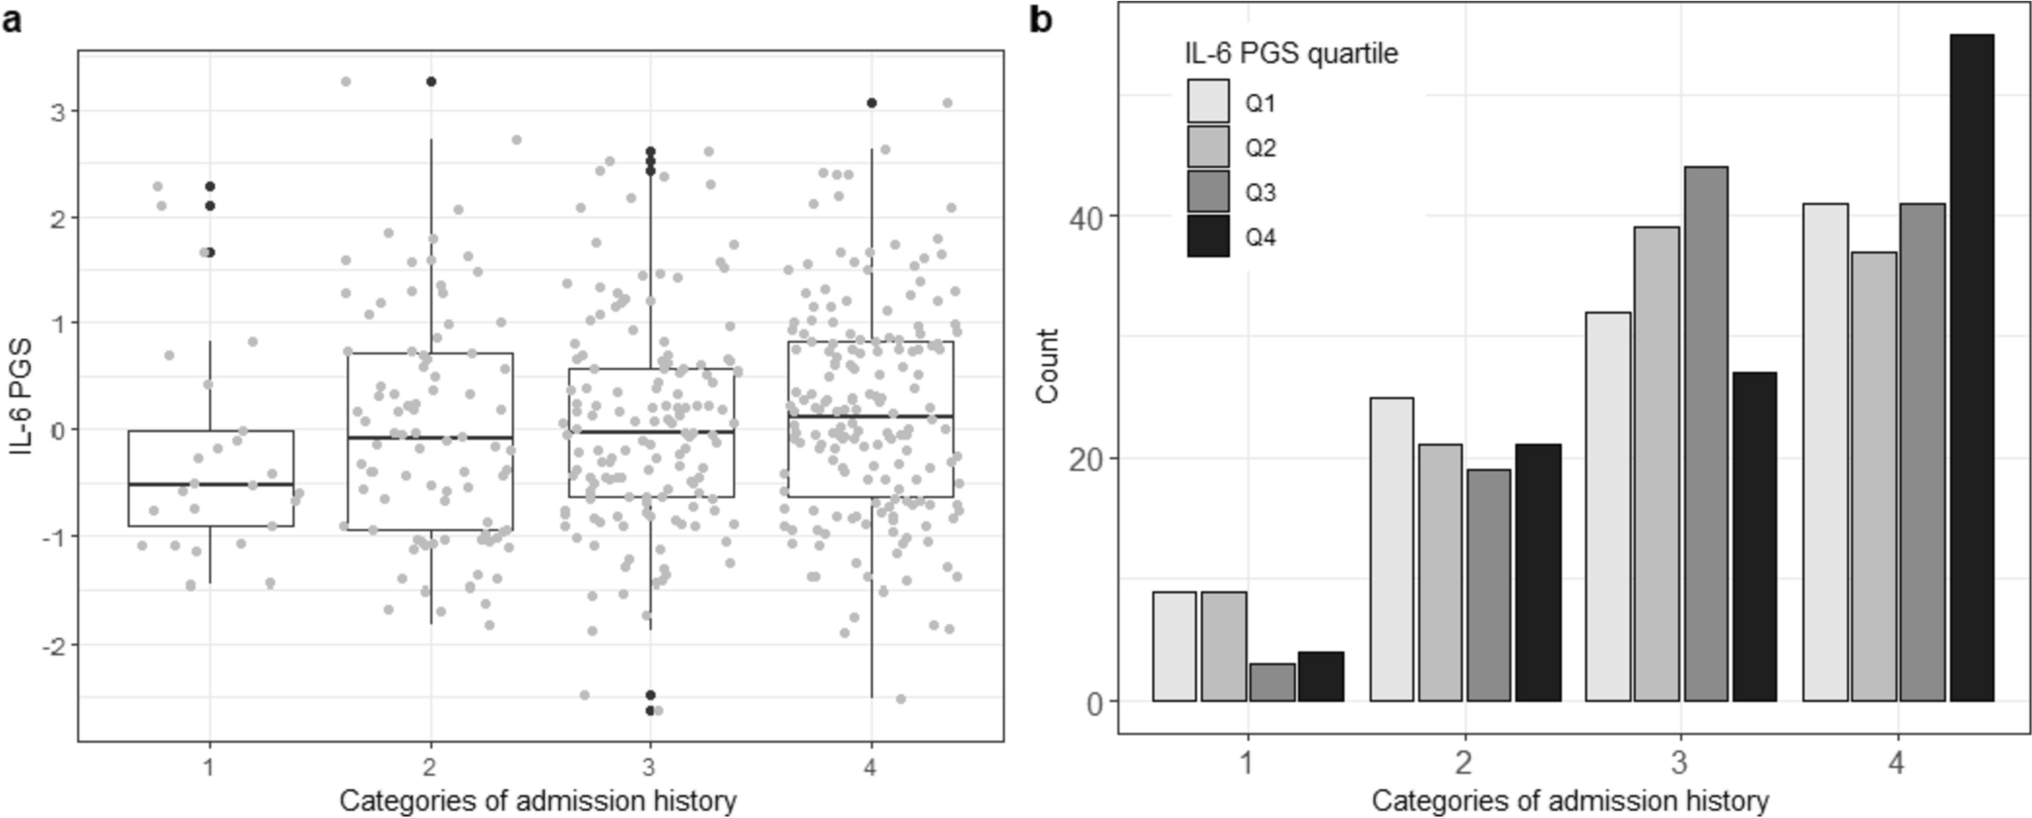 Association between psychiatric admissions in patients with schizophrenia and IL-6 plasma levels polygenic score